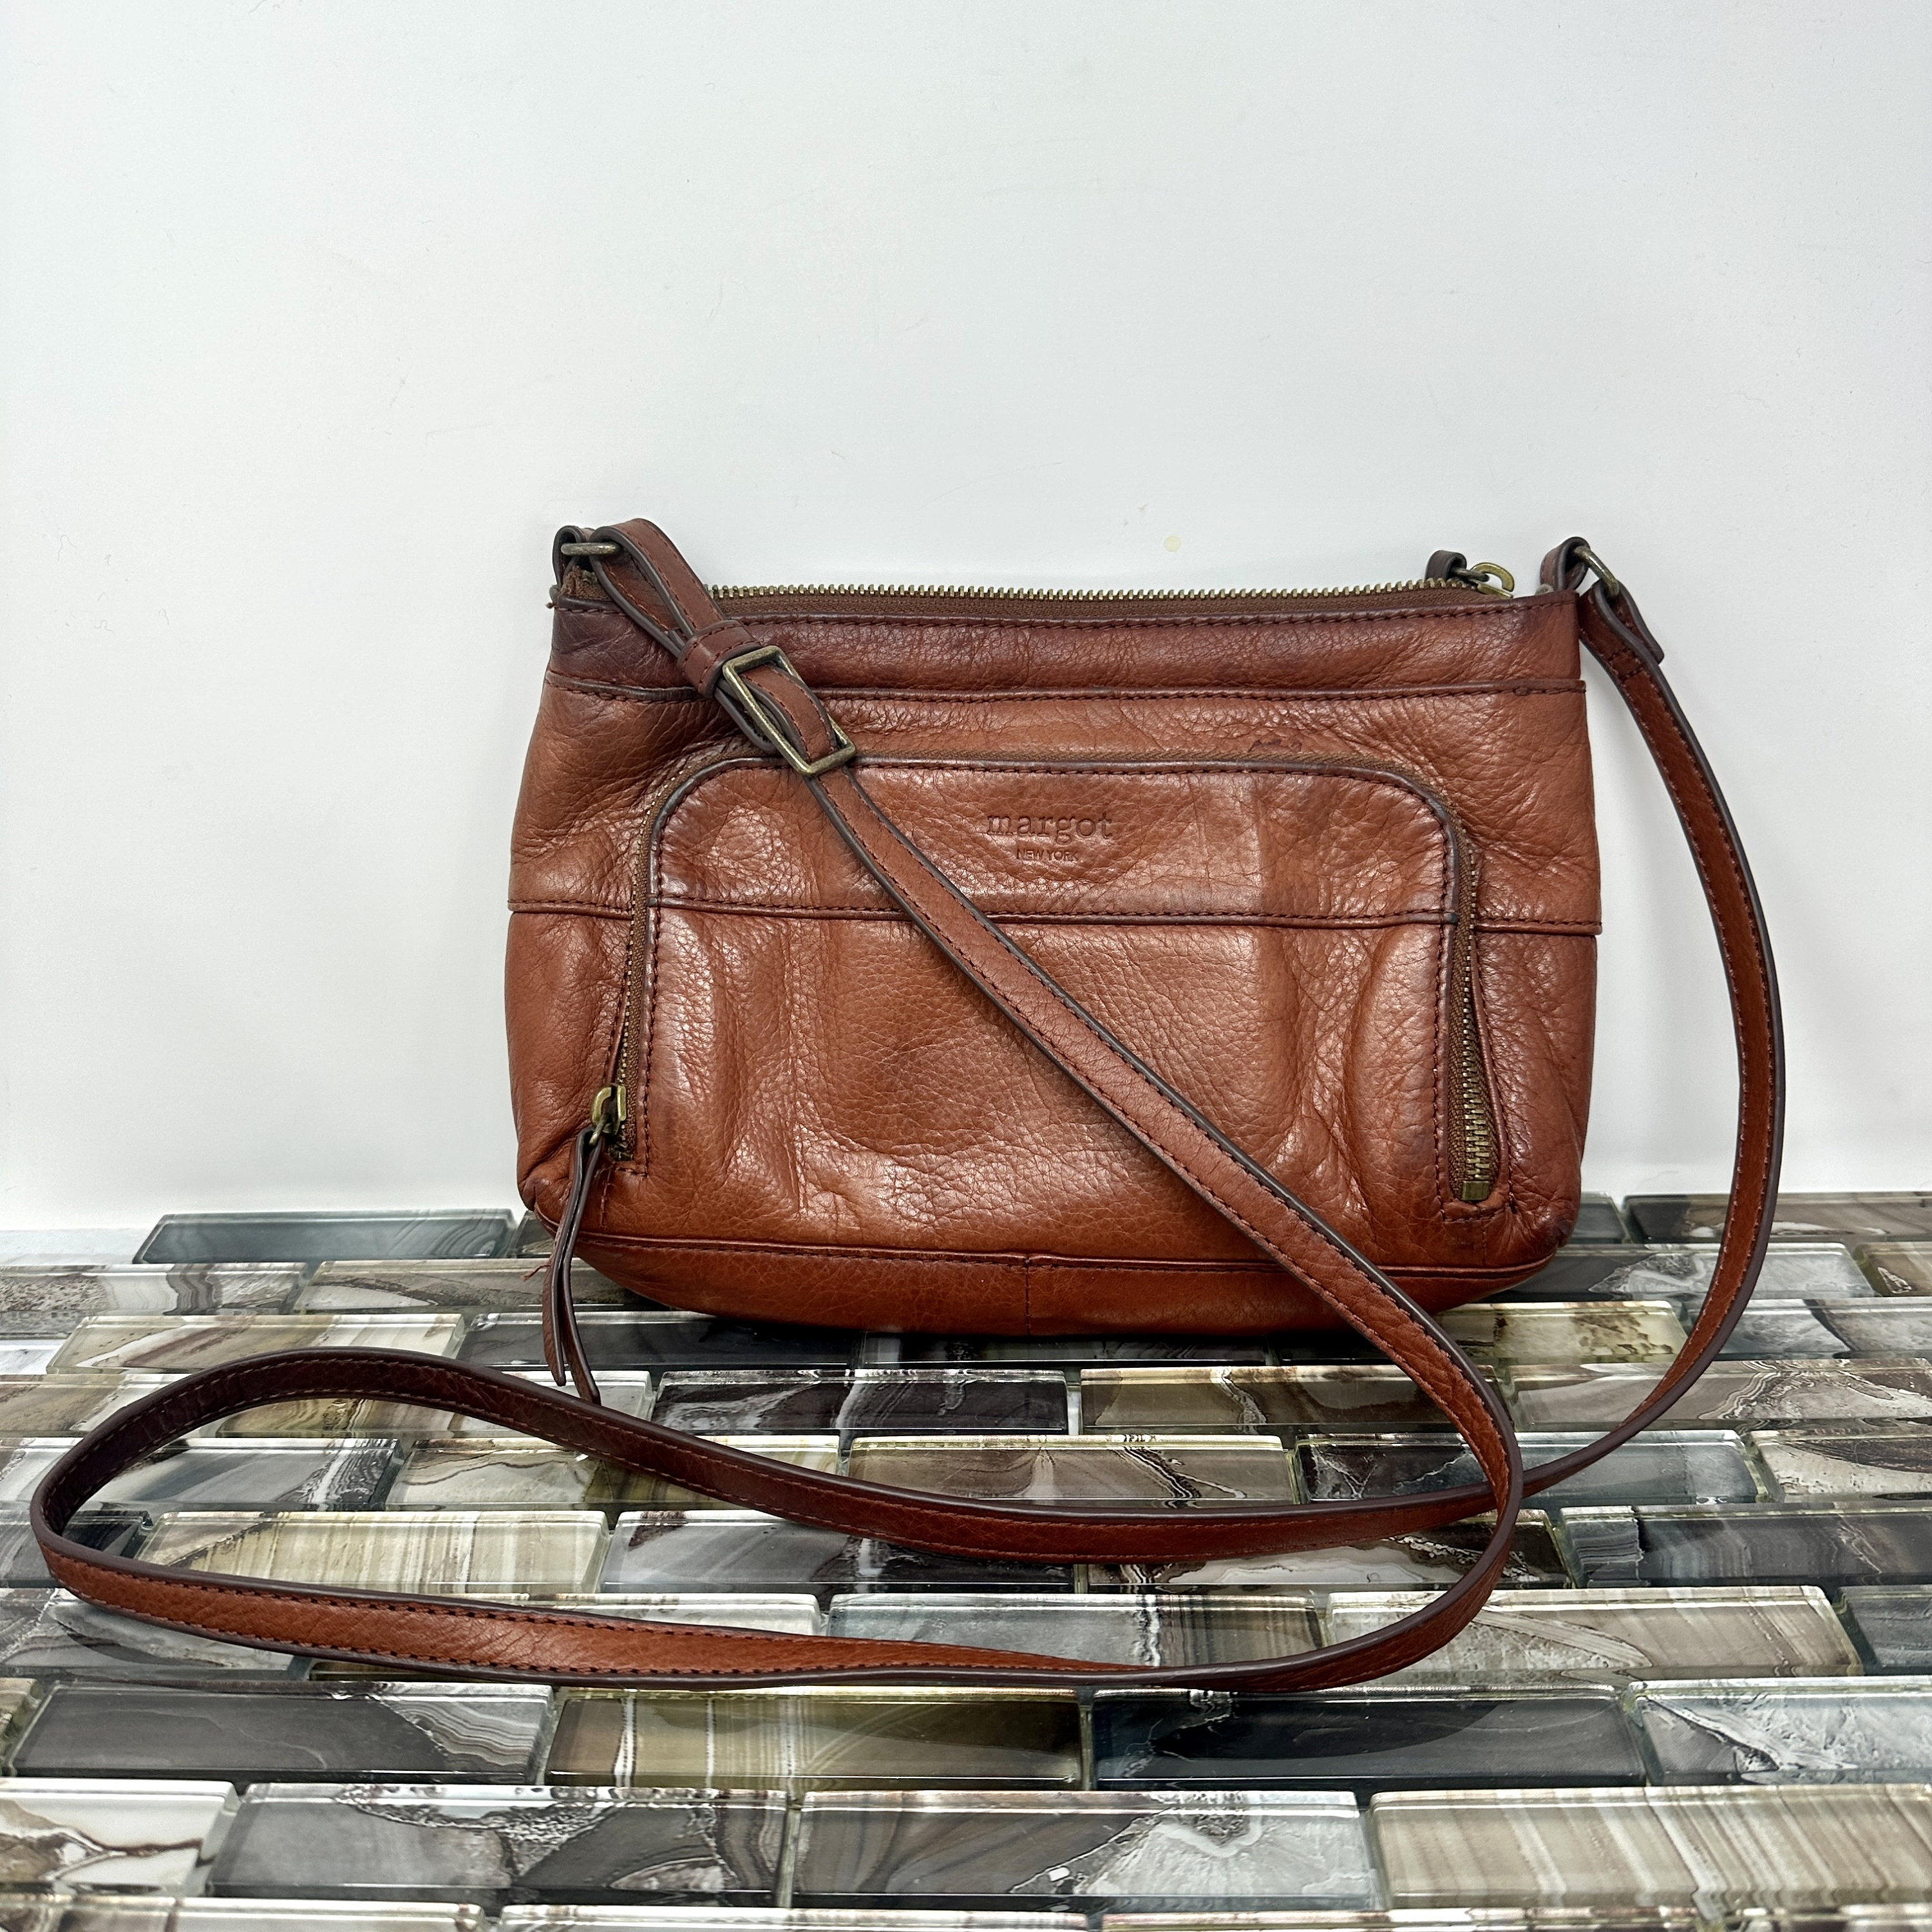 margot, Bags, Margot Leather Backpack